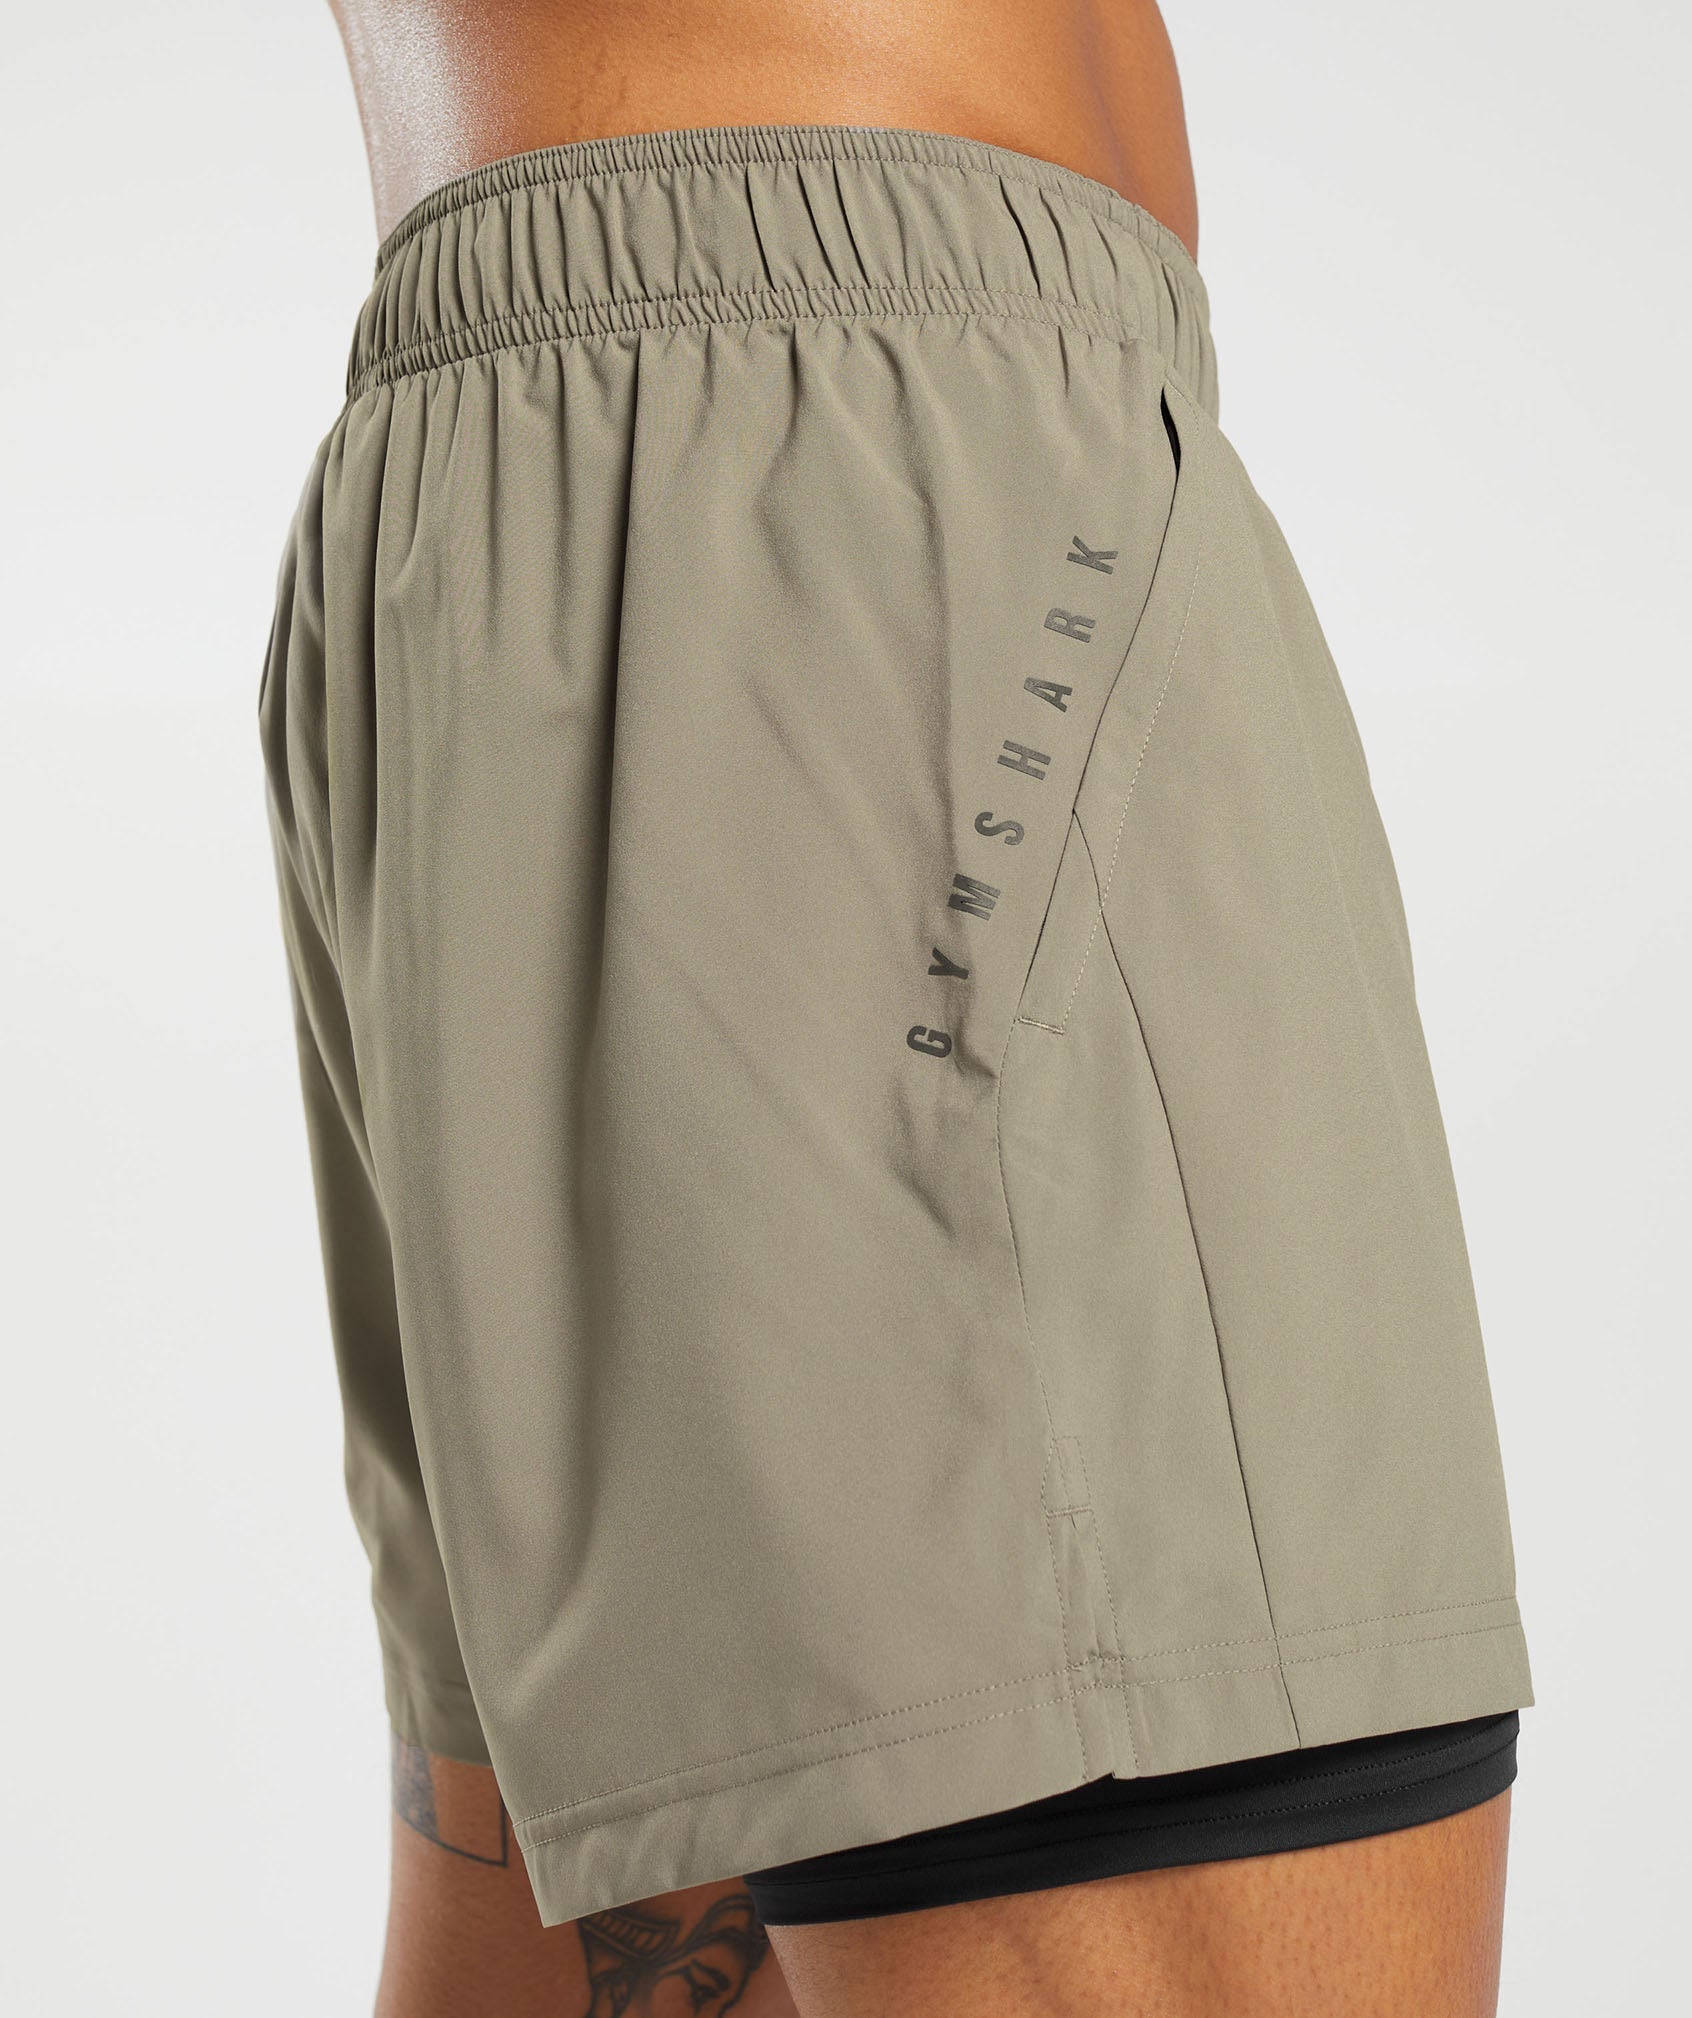 Sport 5" 2 in 1 Shorts in Linen Brown/Black - view 6